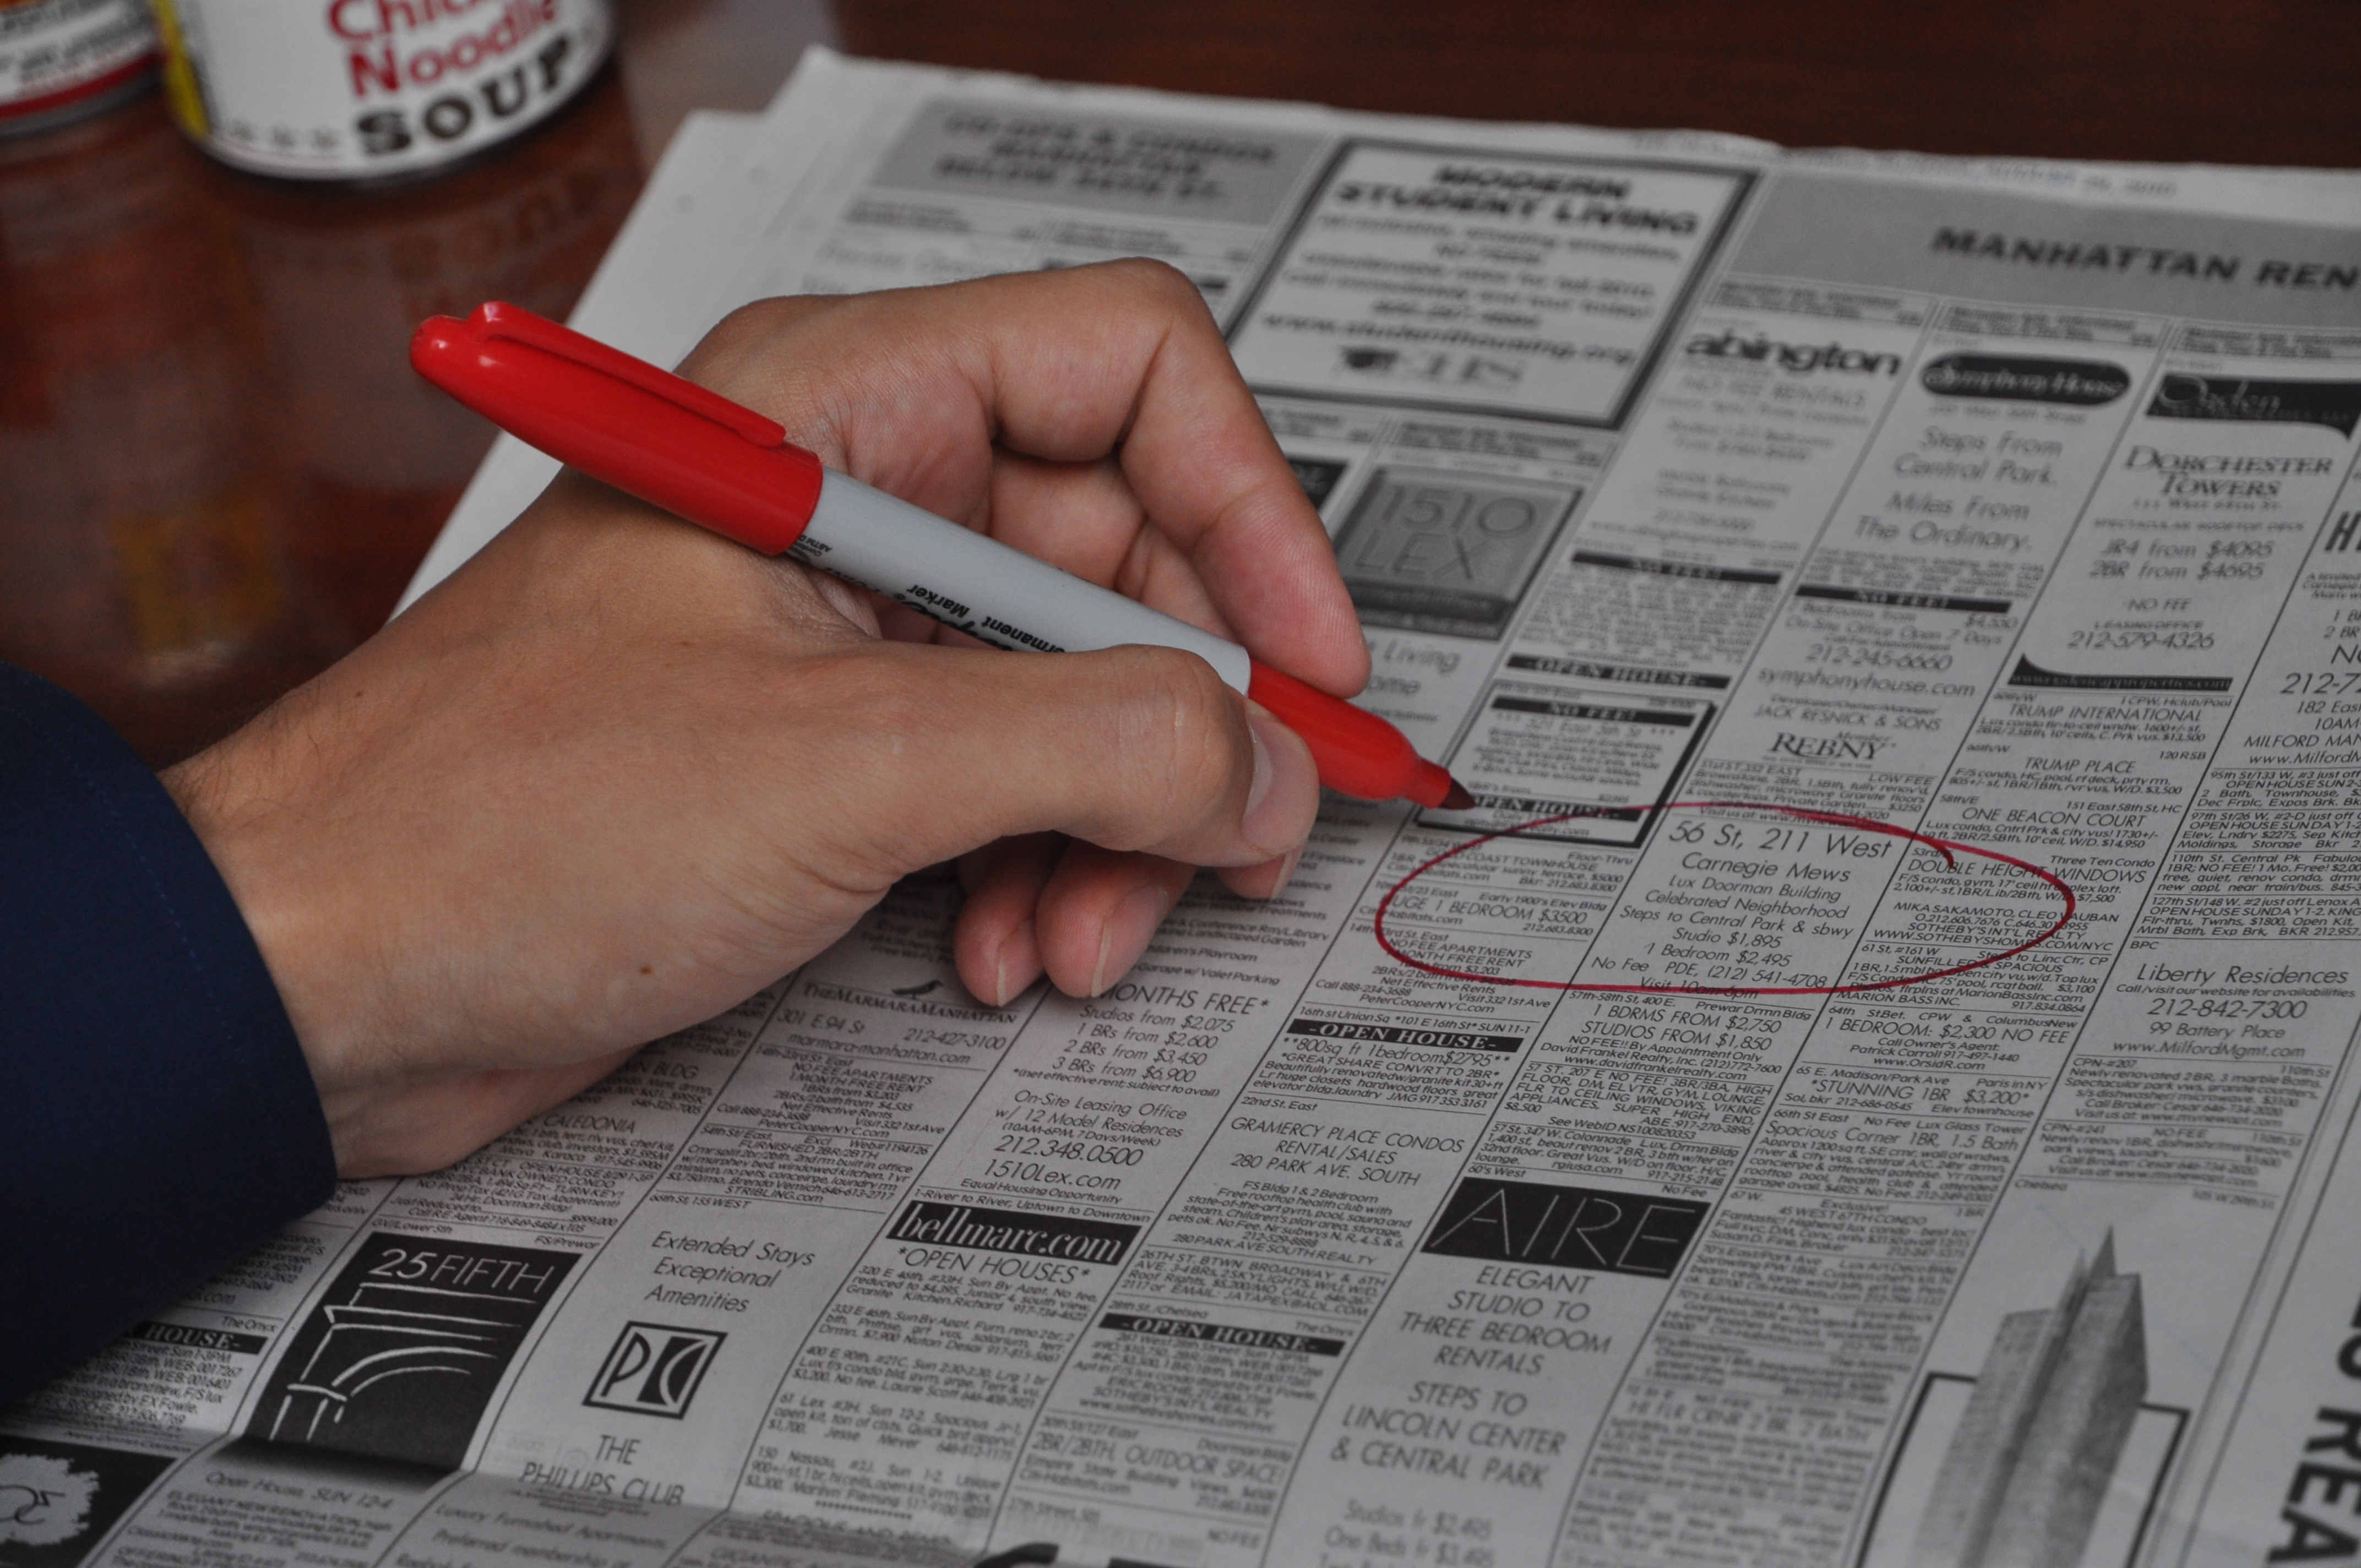 Hand holding  a red marker poised over the Housing Wanted section of a newspaper after  circling a specific ad